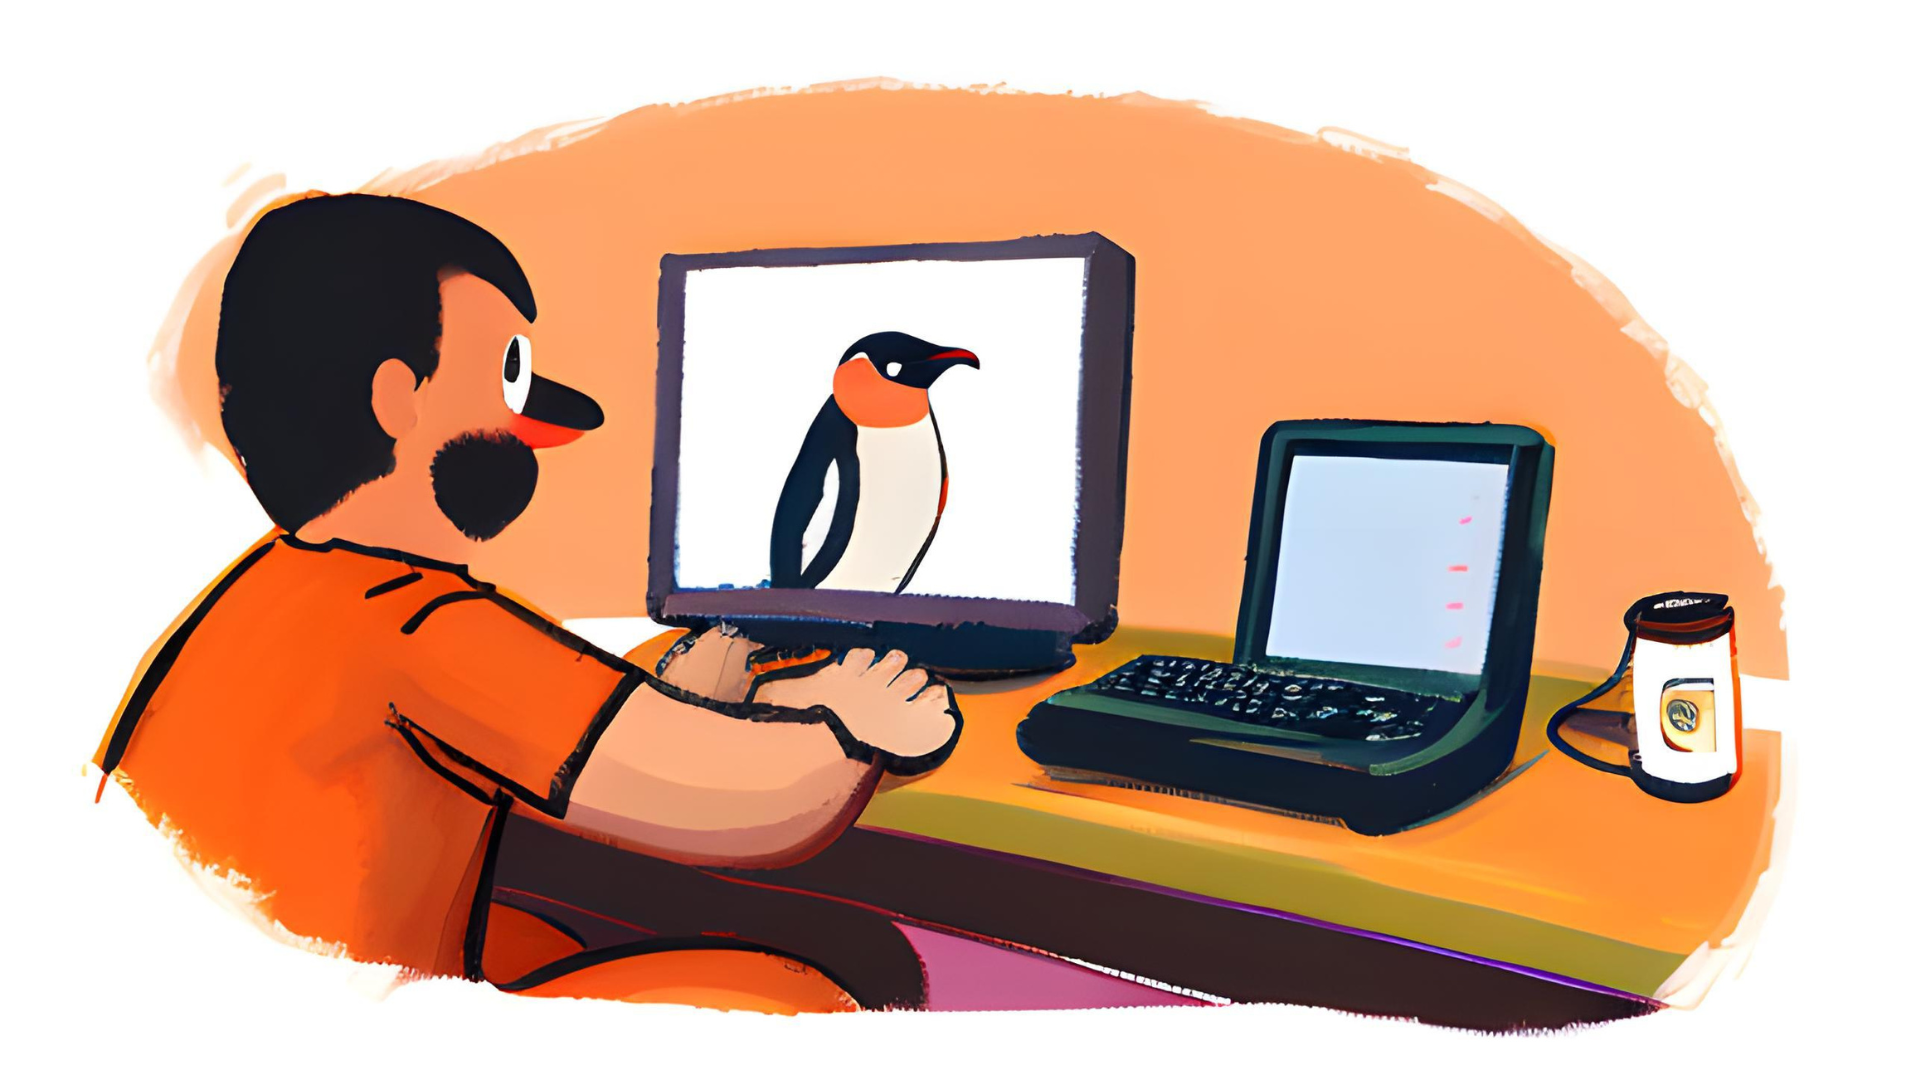 An illustration of a bearded man with a computer monitor in front of him with the image of a penguin